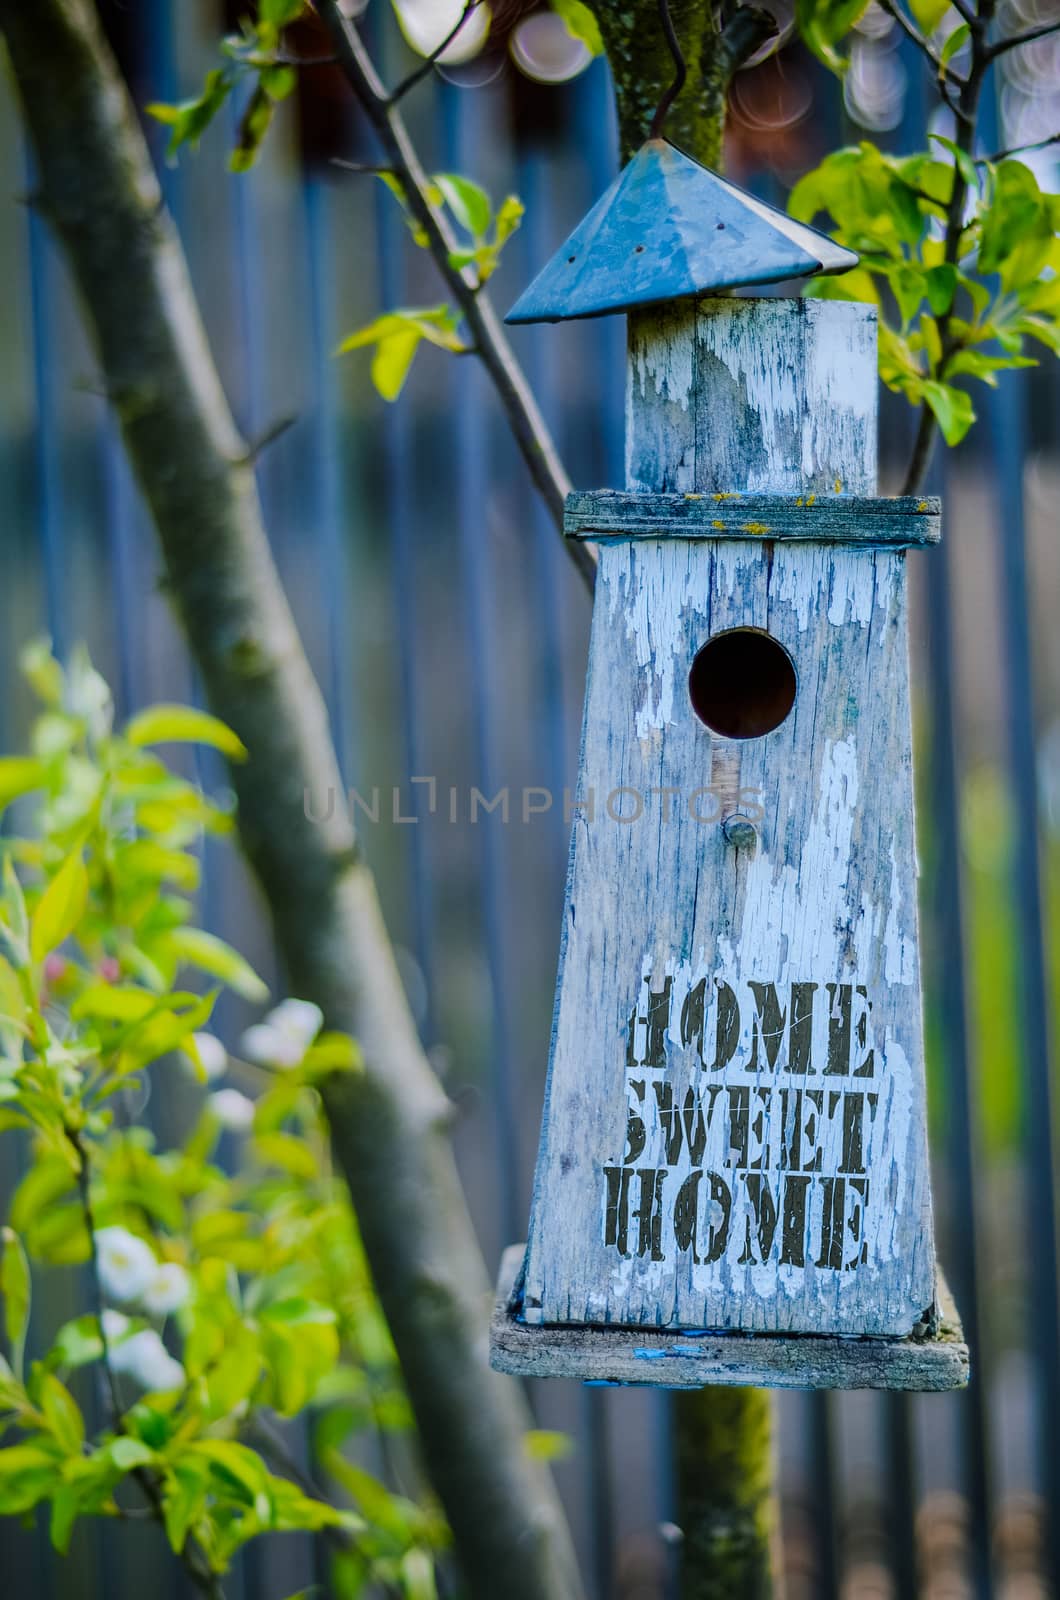 Retro Filtered Rustic Bird House With Home Sweet Home Printed On Peeling Paint